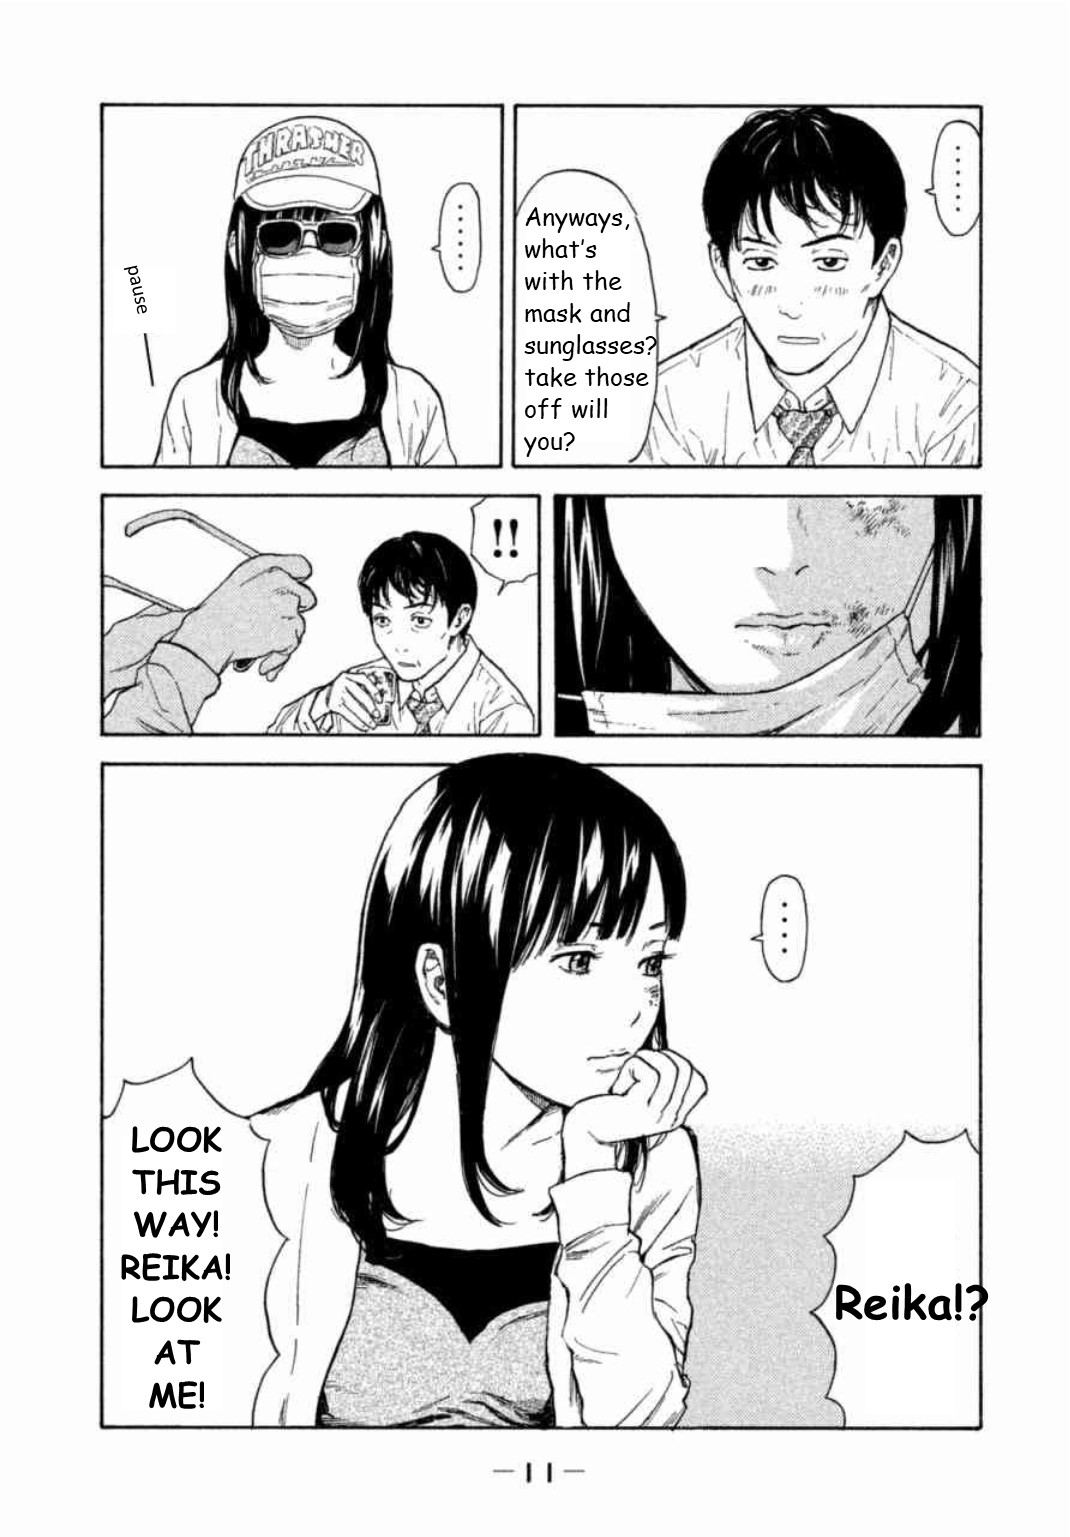 My Home Hero Vol. 1 Ch. 1 First Encounter with Daughter's Boyfriend